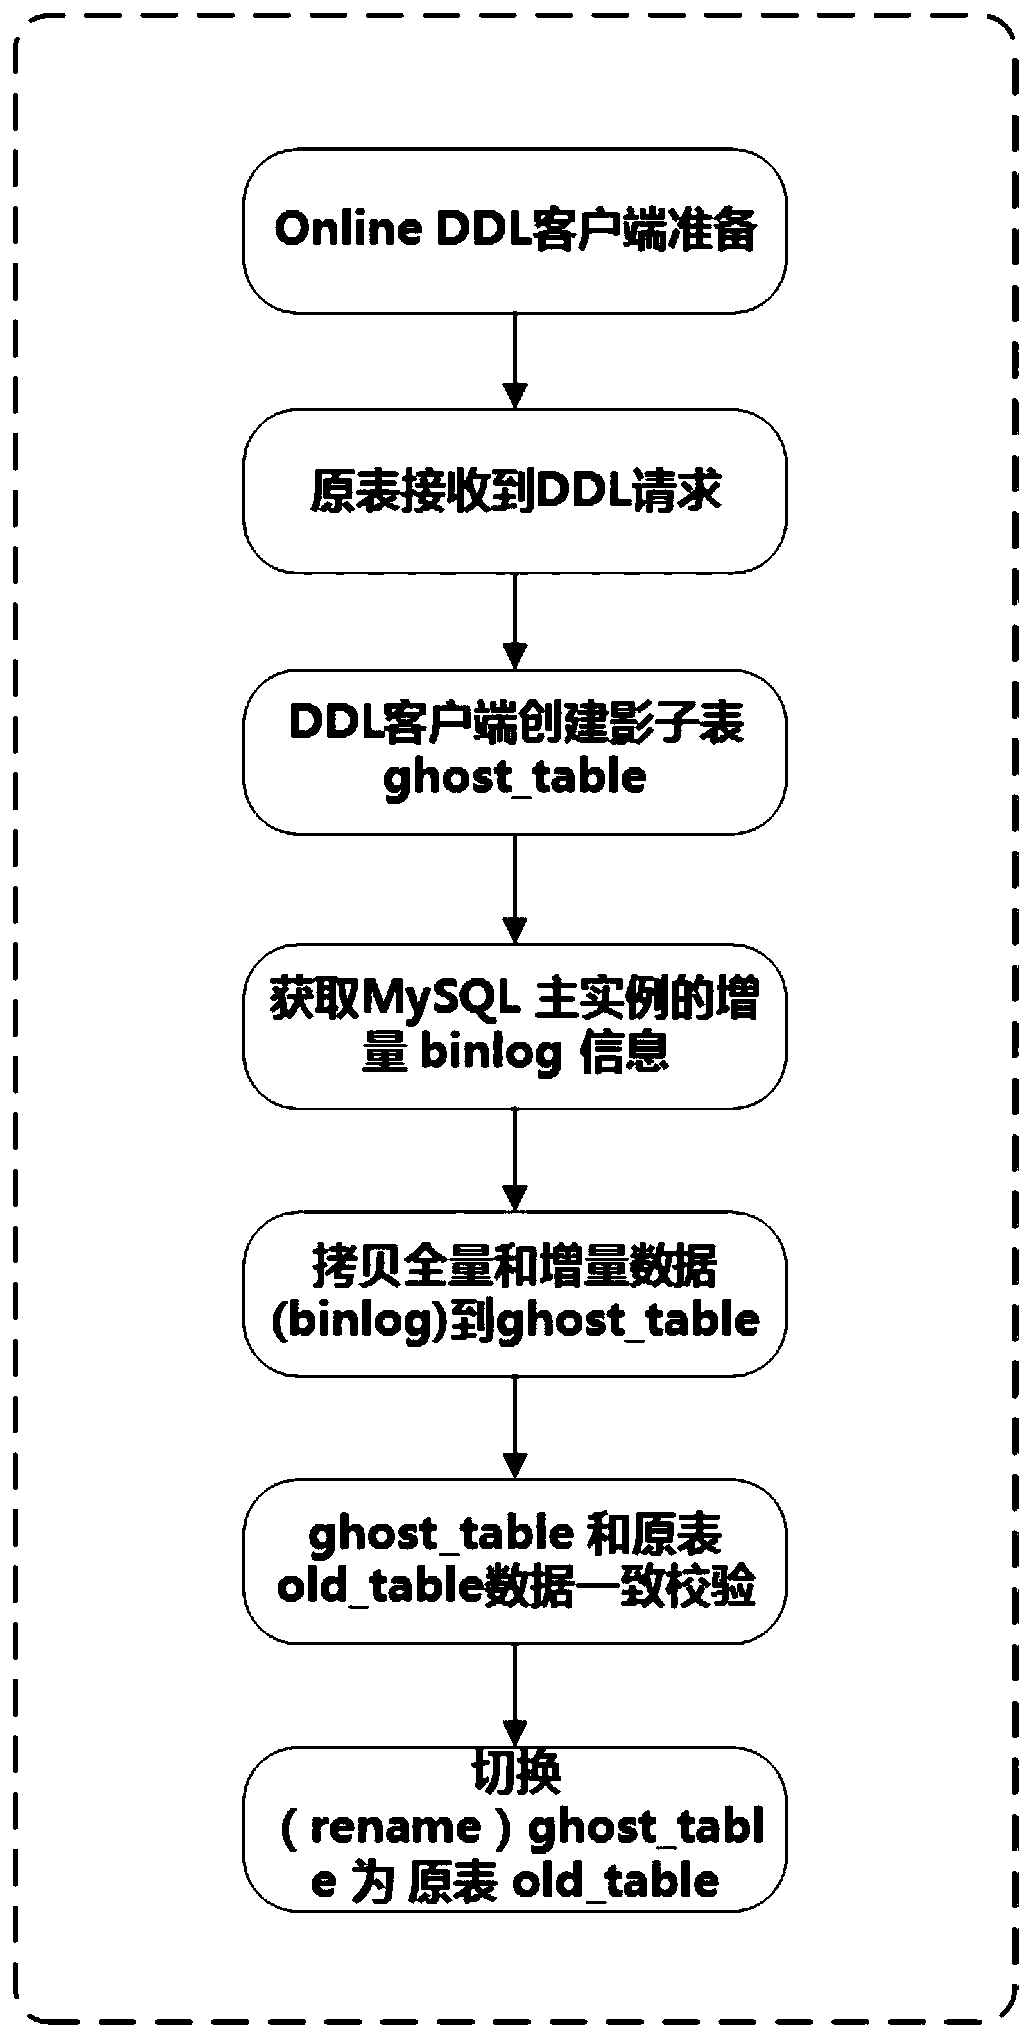 Method and device for online DDL table structure modification of relational database